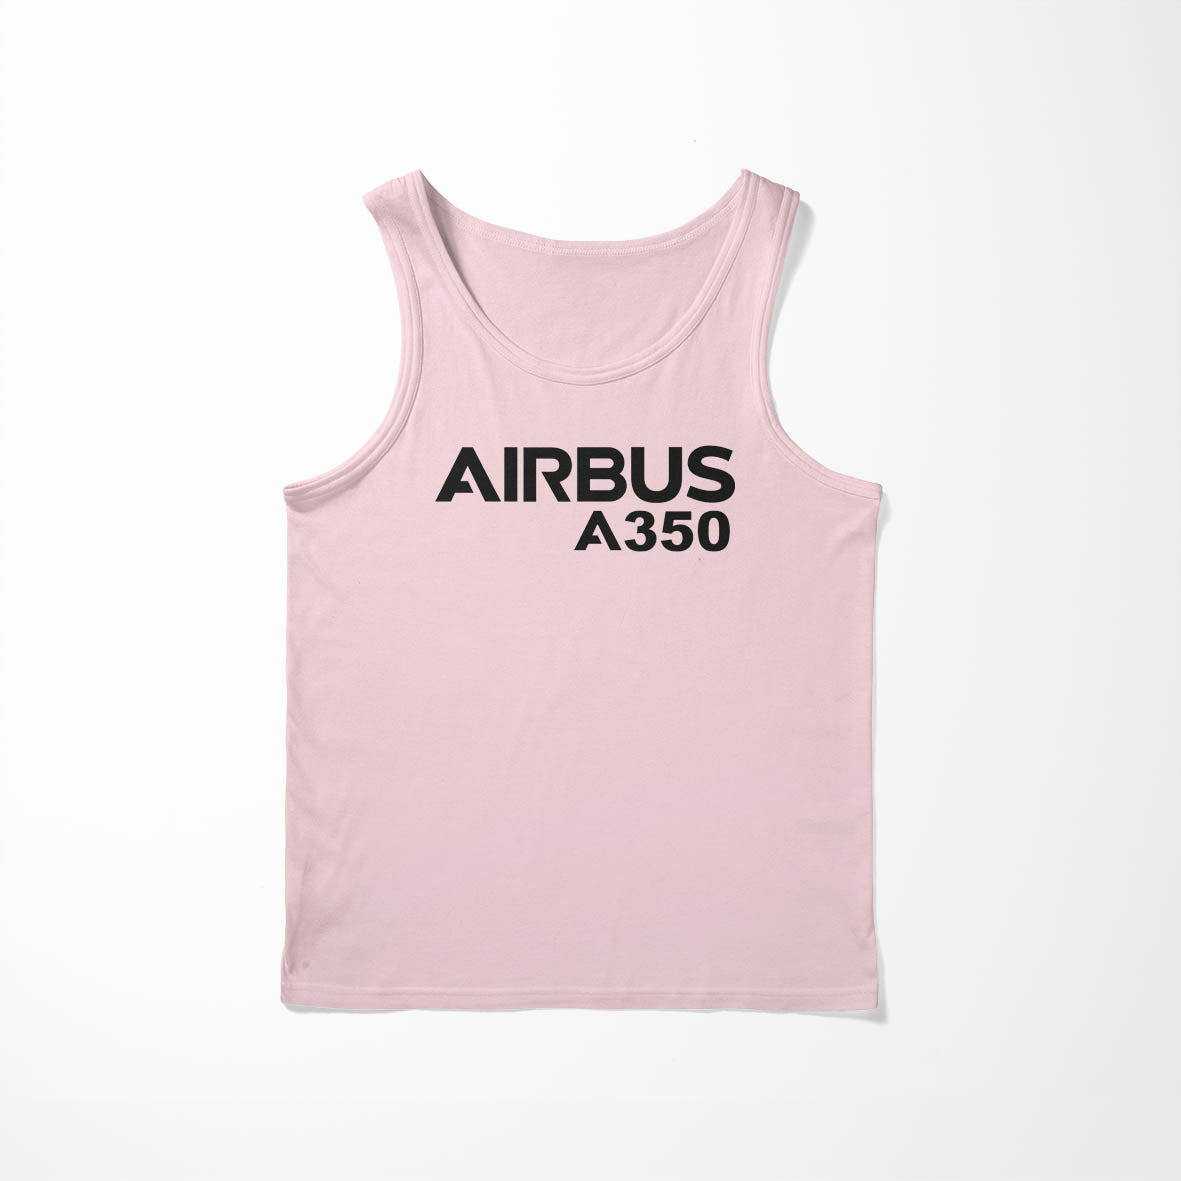 Airbus A350 & Text Designed Tank Tops